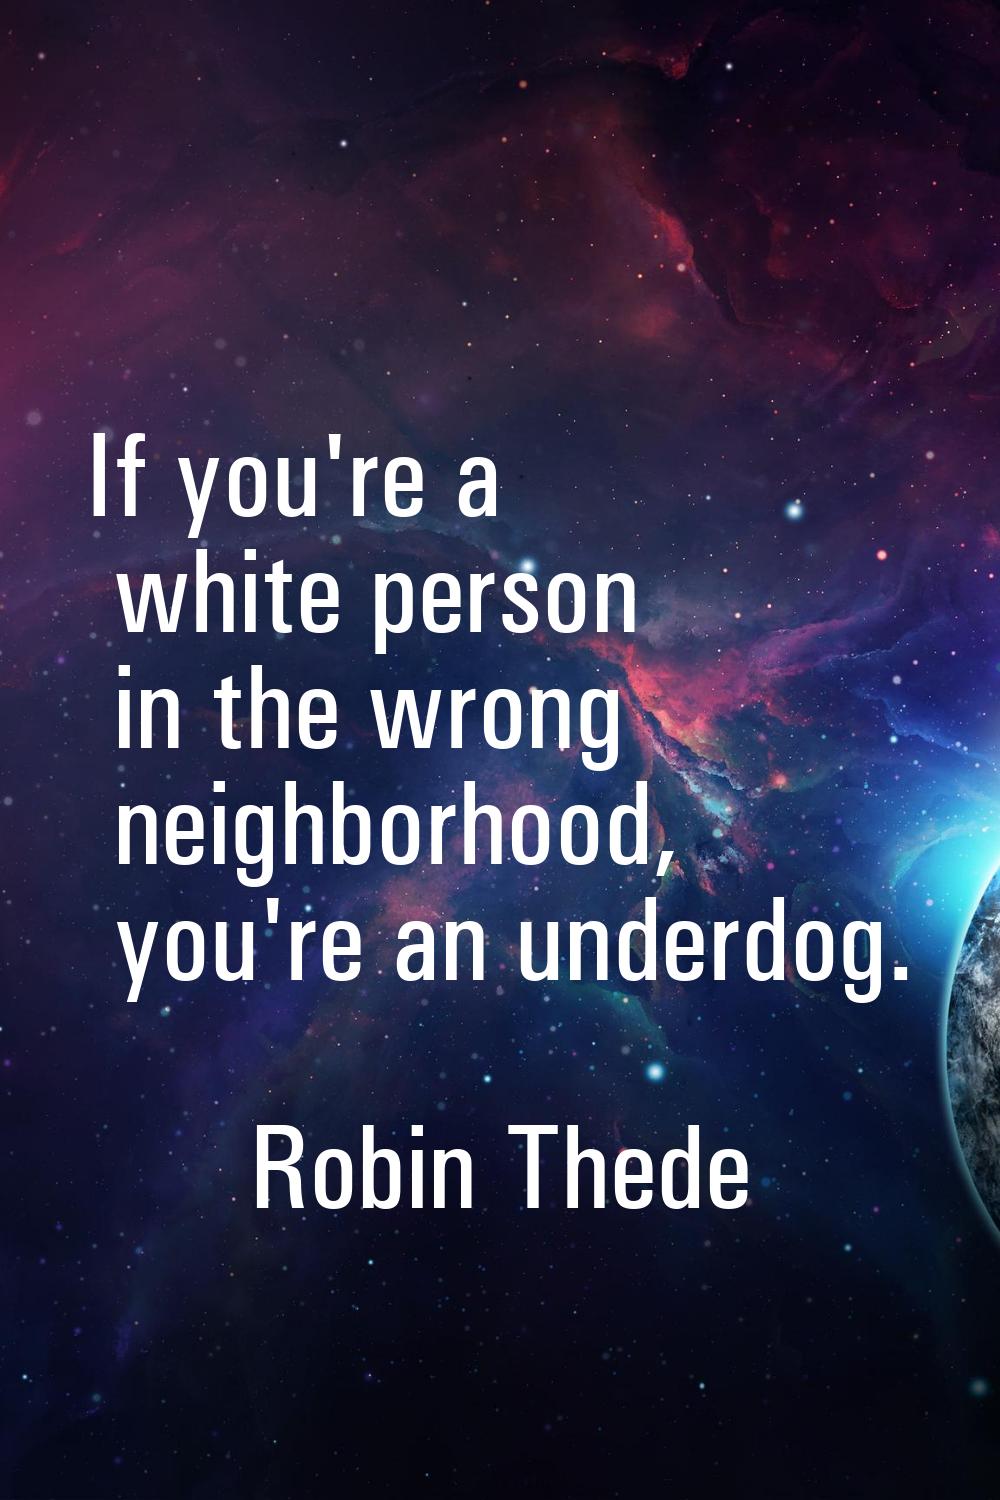 If you're a white person in the wrong neighborhood, you're an underdog.